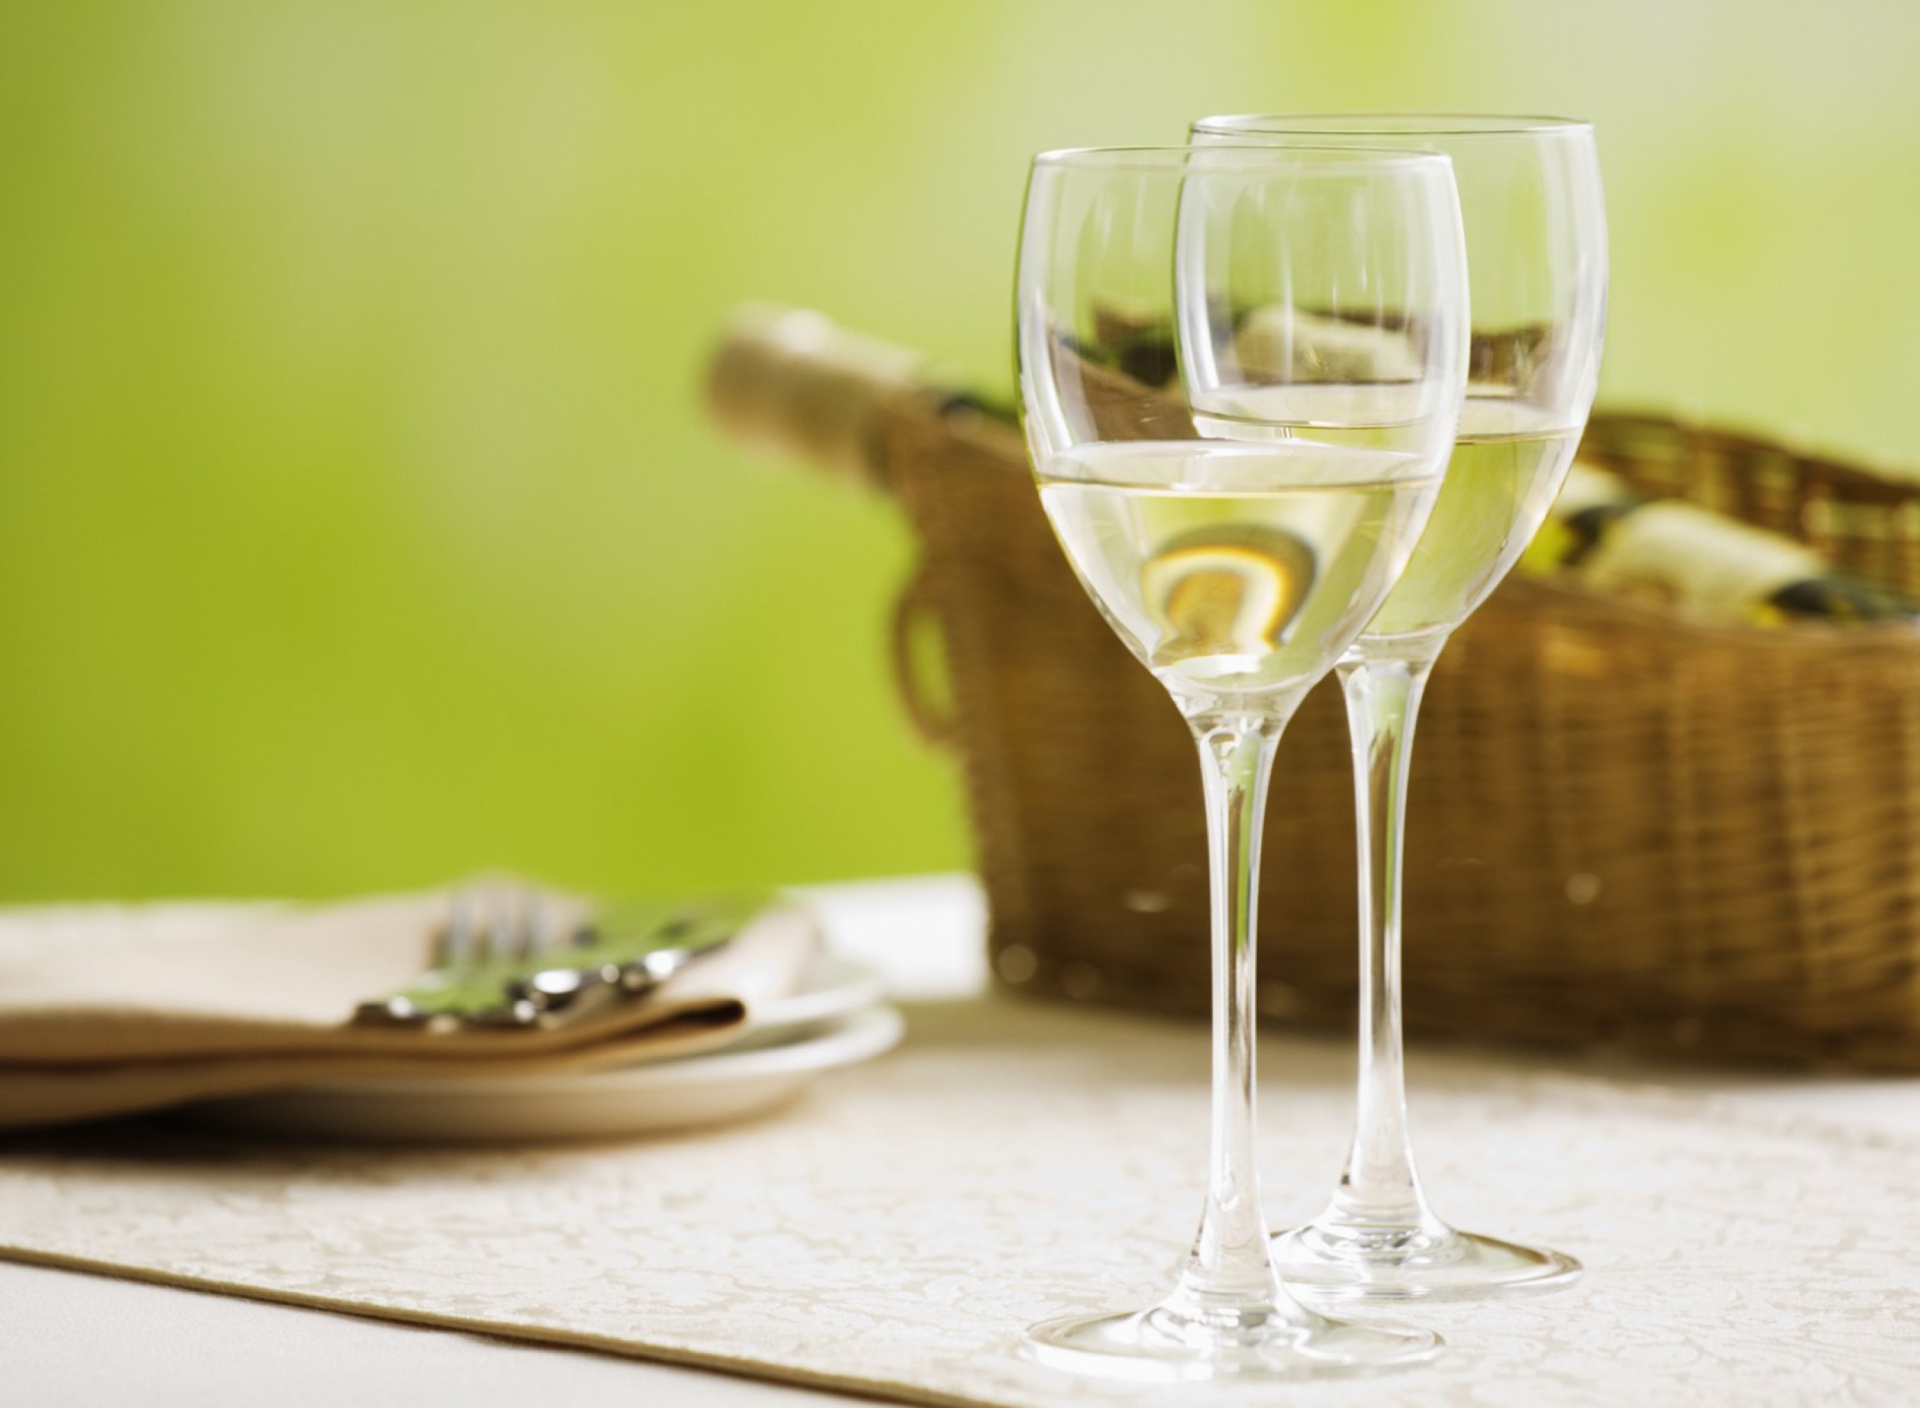 Two Glaeese Of White Wine On Table wallpaper 1920x1408